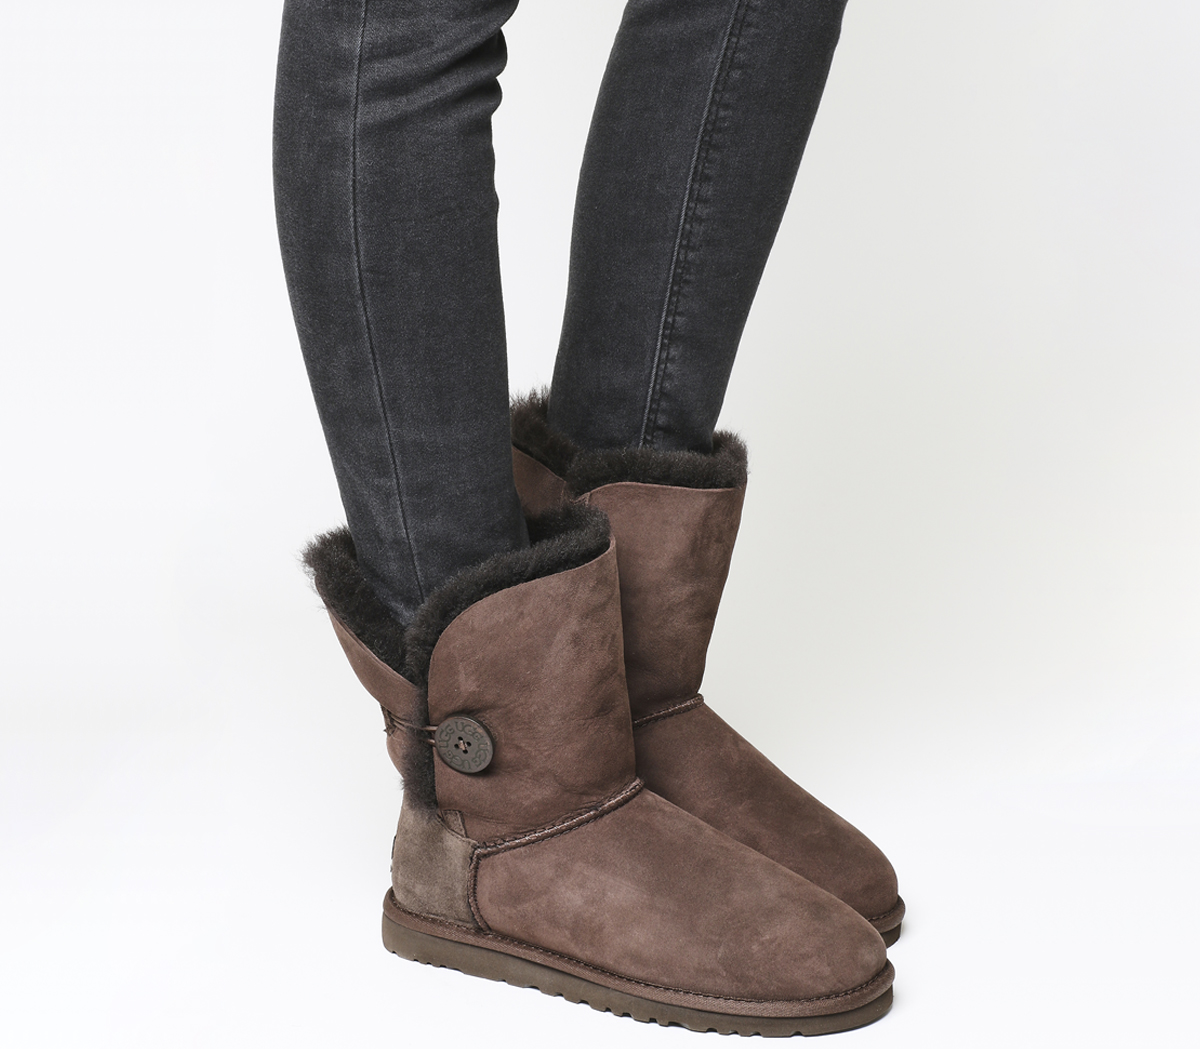 UGGBailey Button BootsChocolate Suede